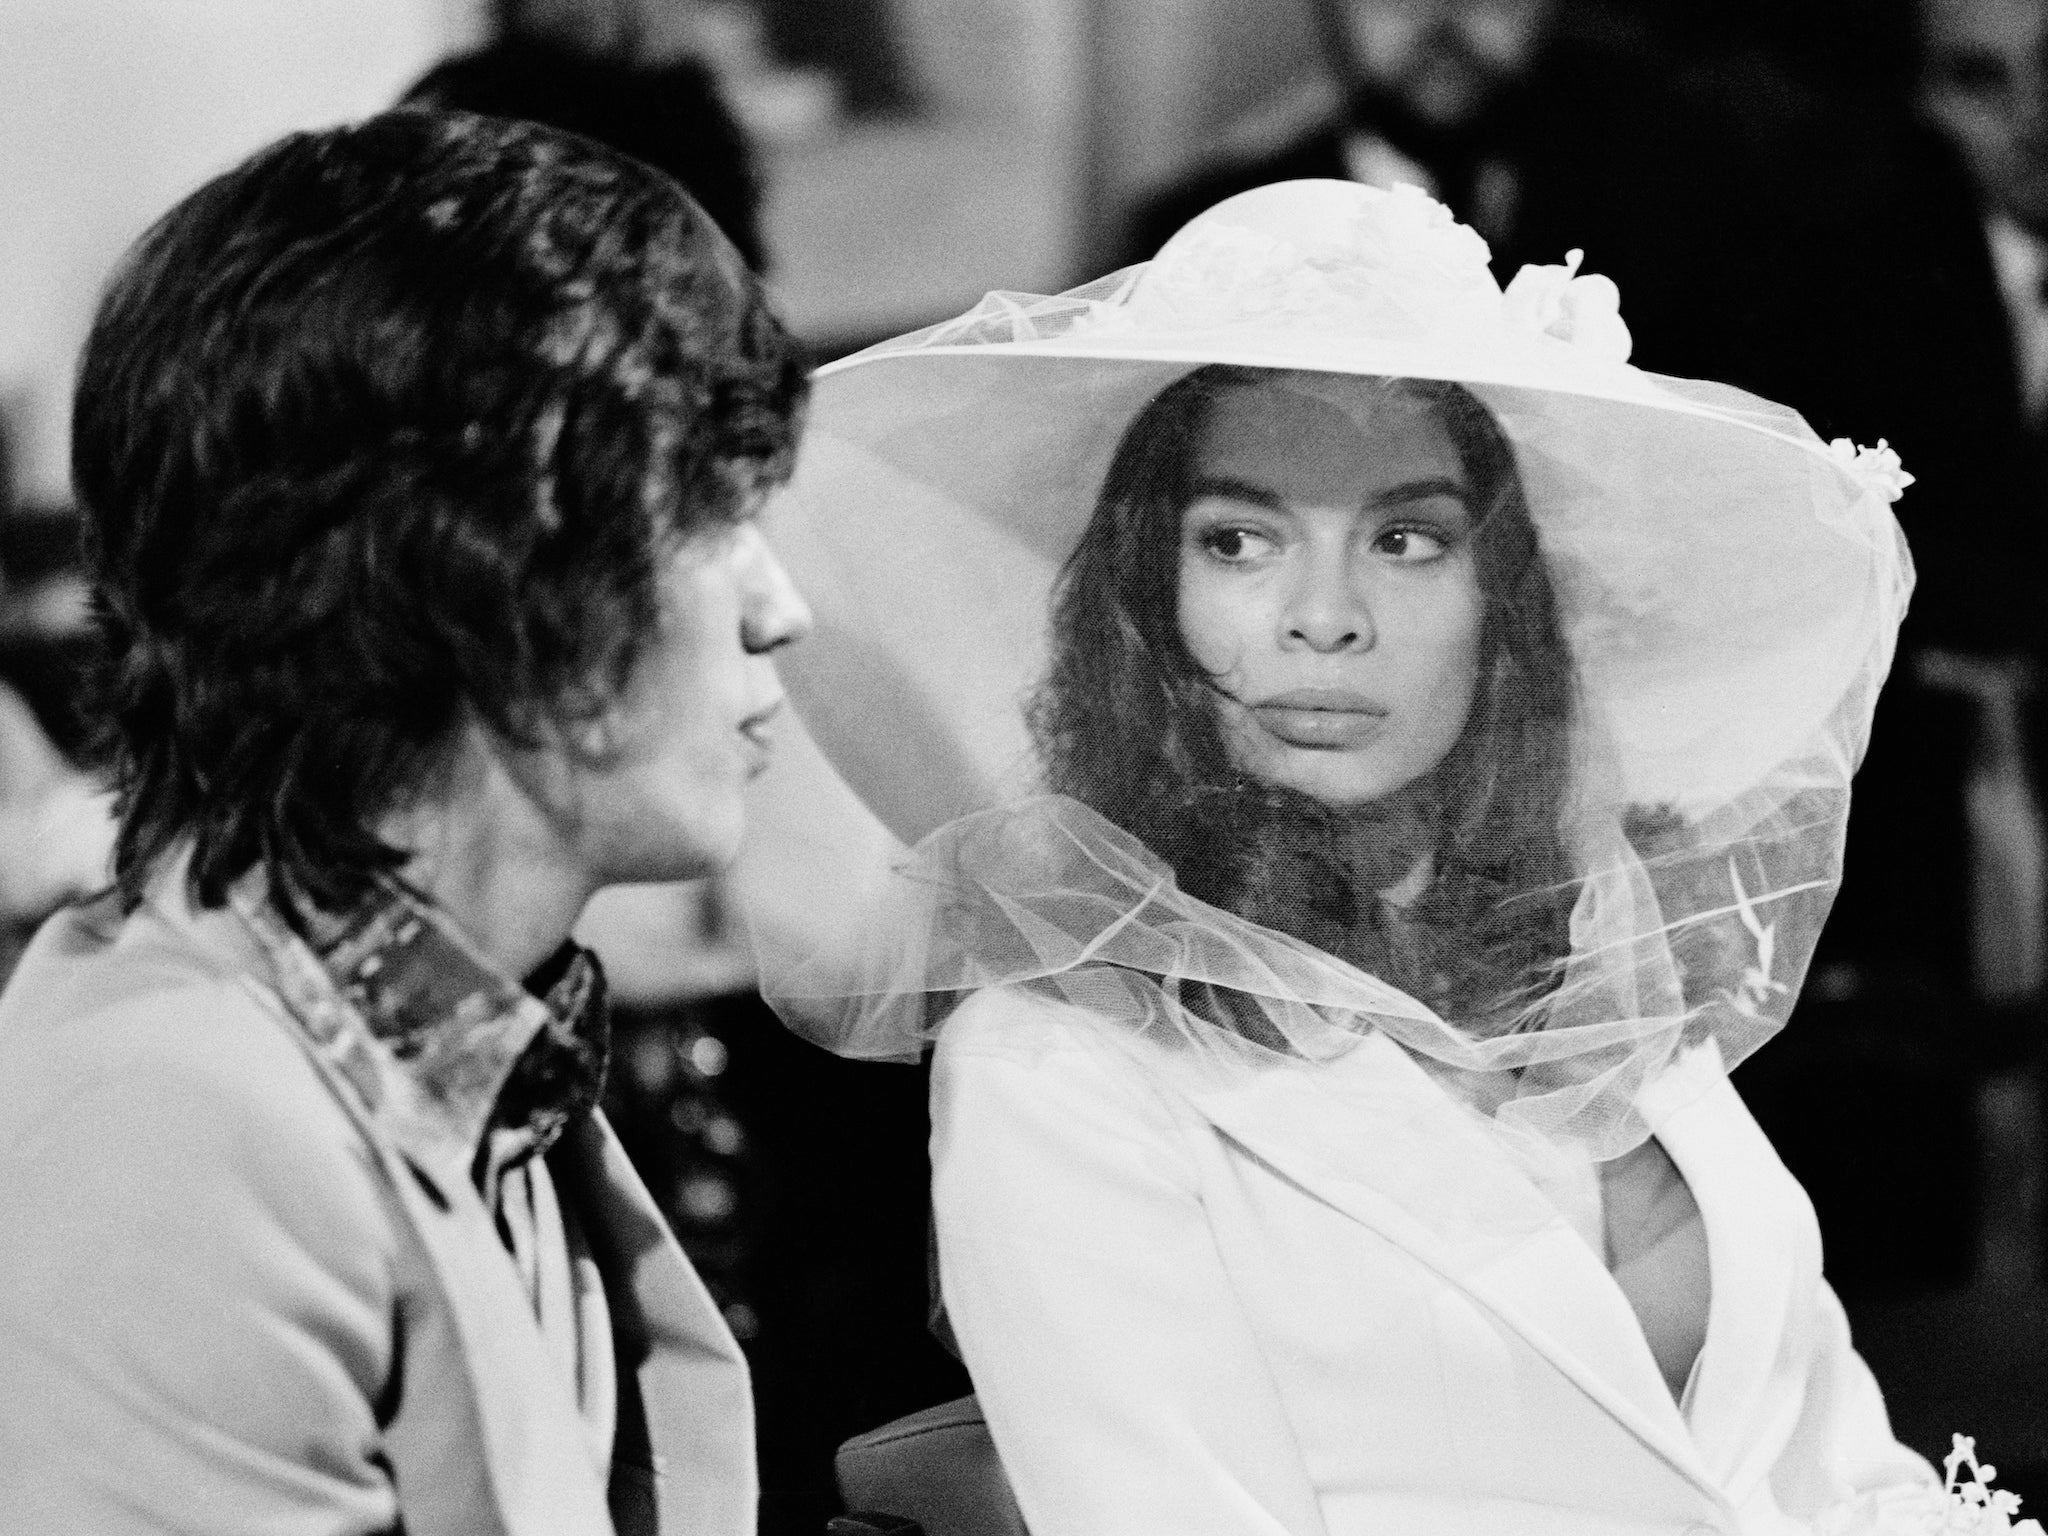 ‘Over on the wedding day’: Mick and Bianca Jagger minutes before taking their vows in Saint-Tropez, May 1971